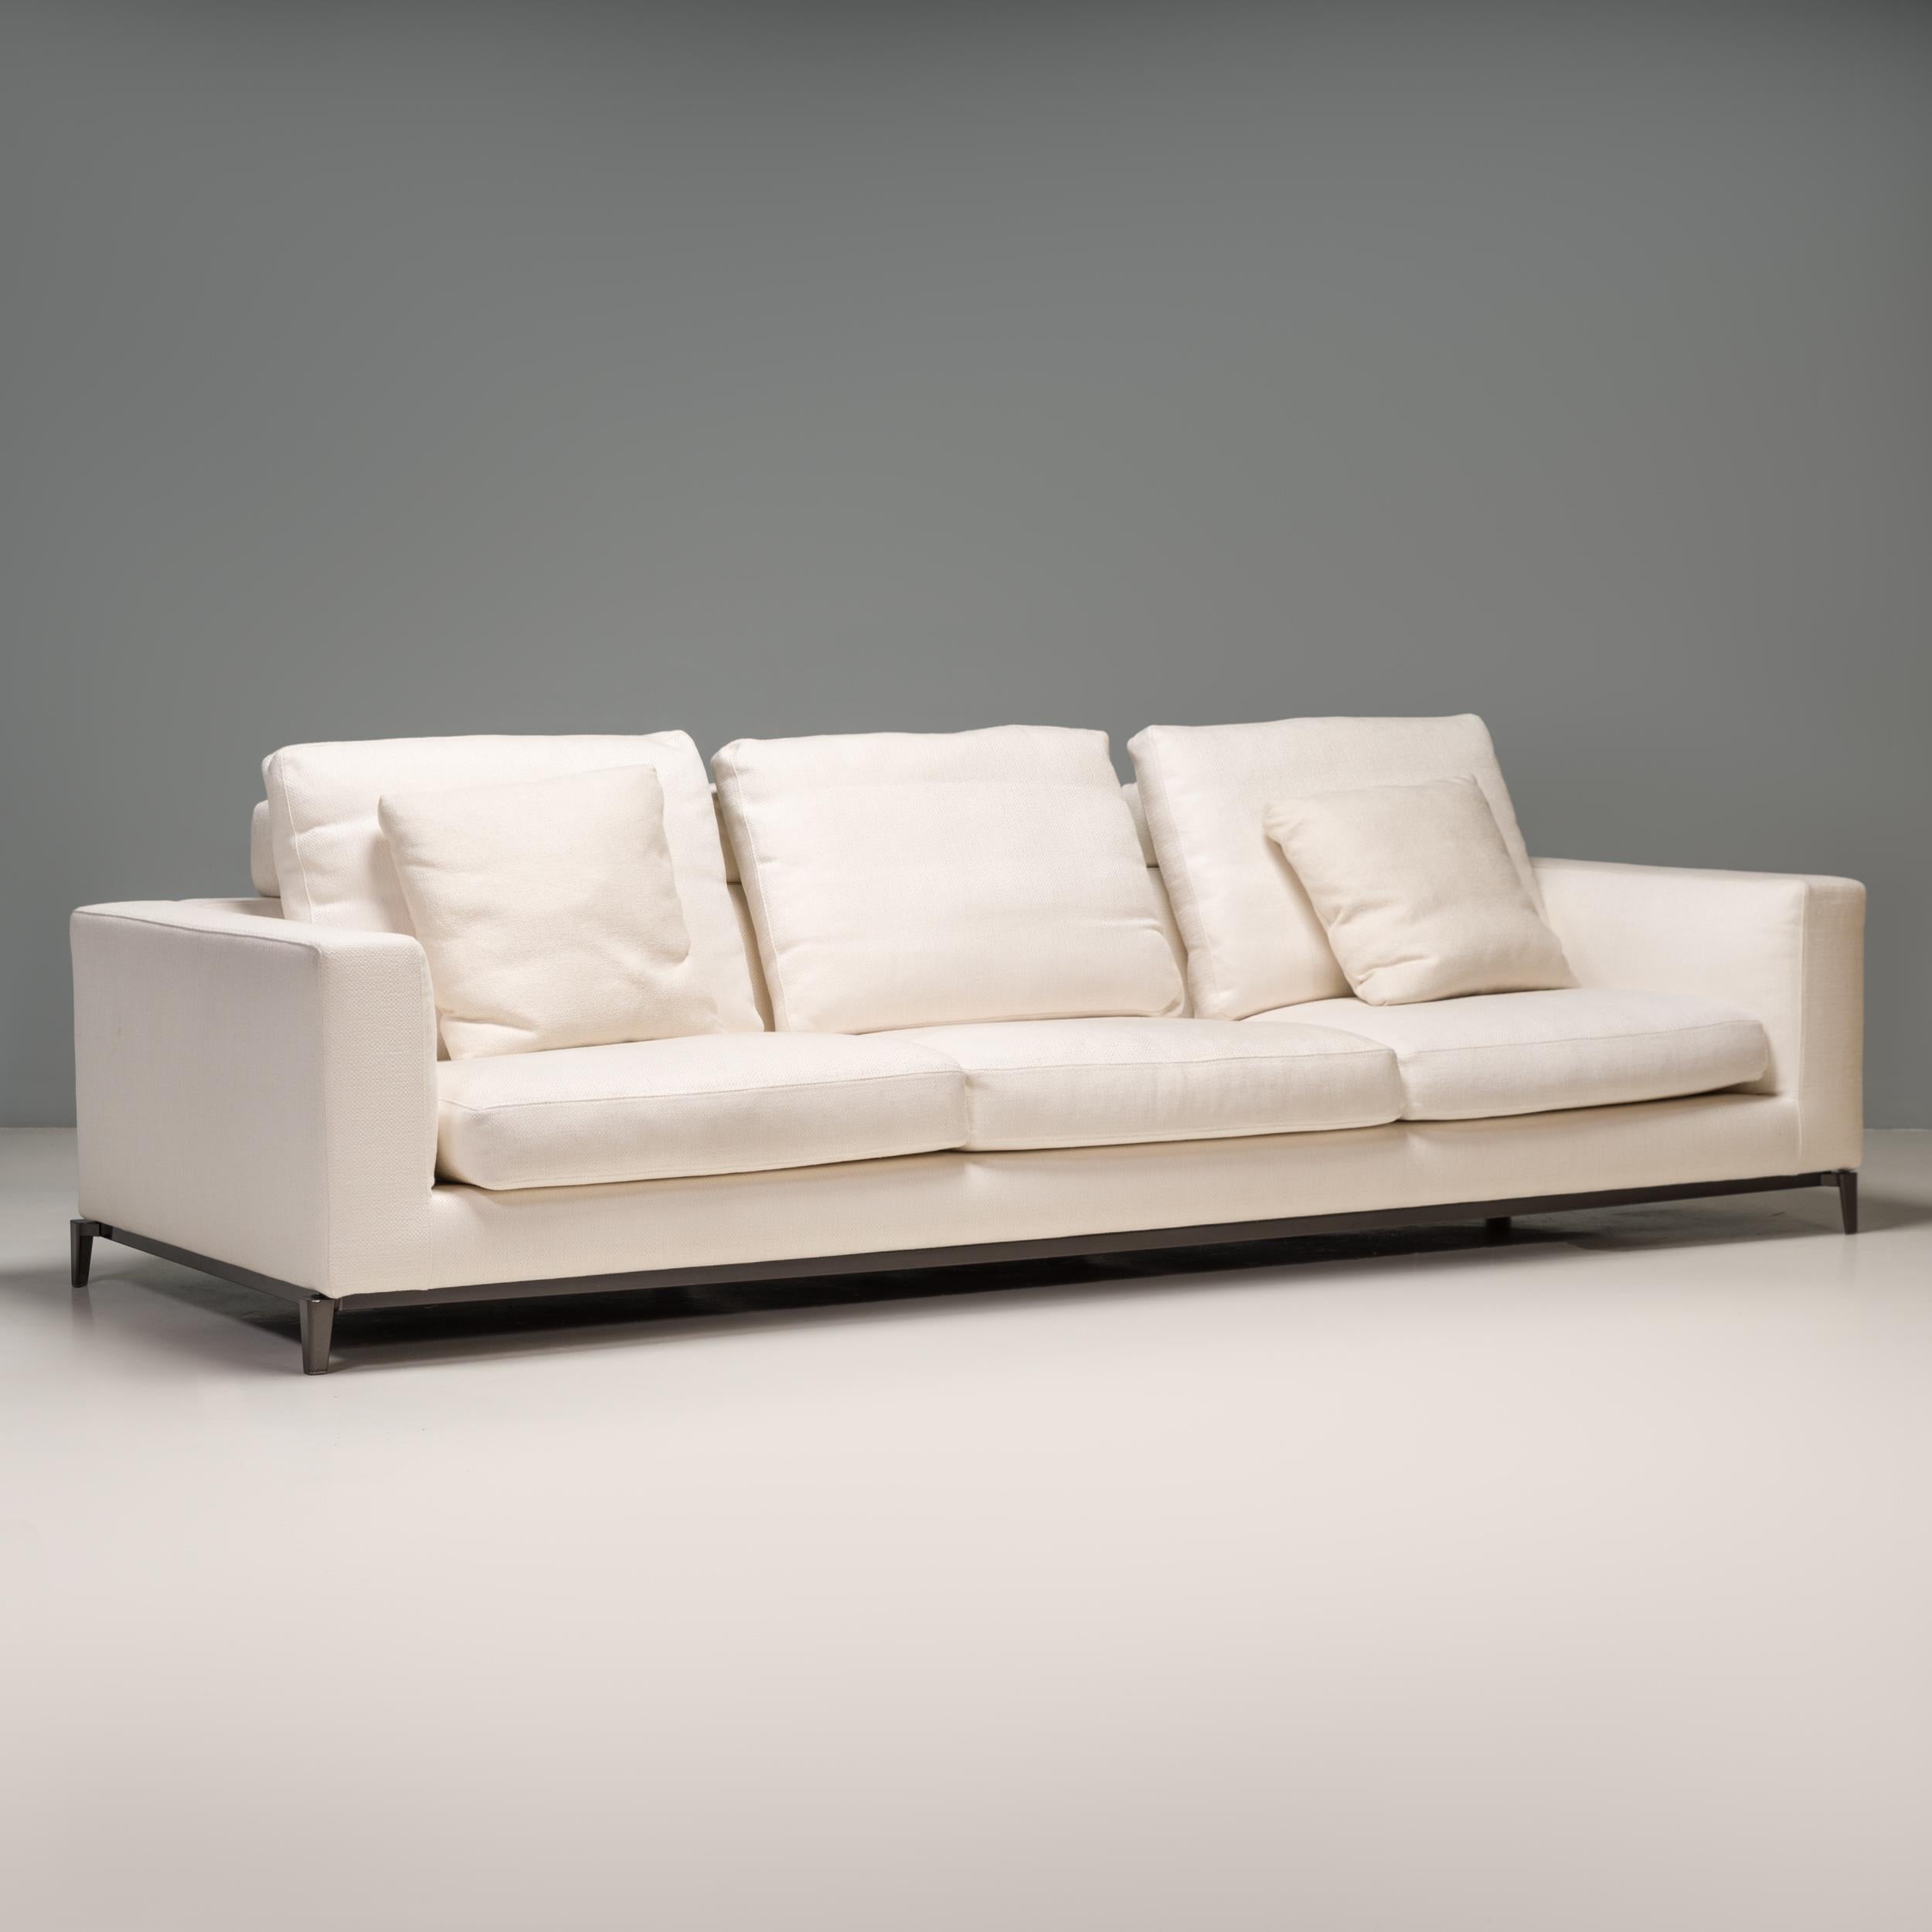 Designed by Rodolfo Dordoni for Minotti, the Andersen sofa formed part of the 2010 Senza Tempo Collection and embodies timeless Italian design.

Fully upholstered in white fabric, the sofa has a modern tuxedo style silhouette with the integrated